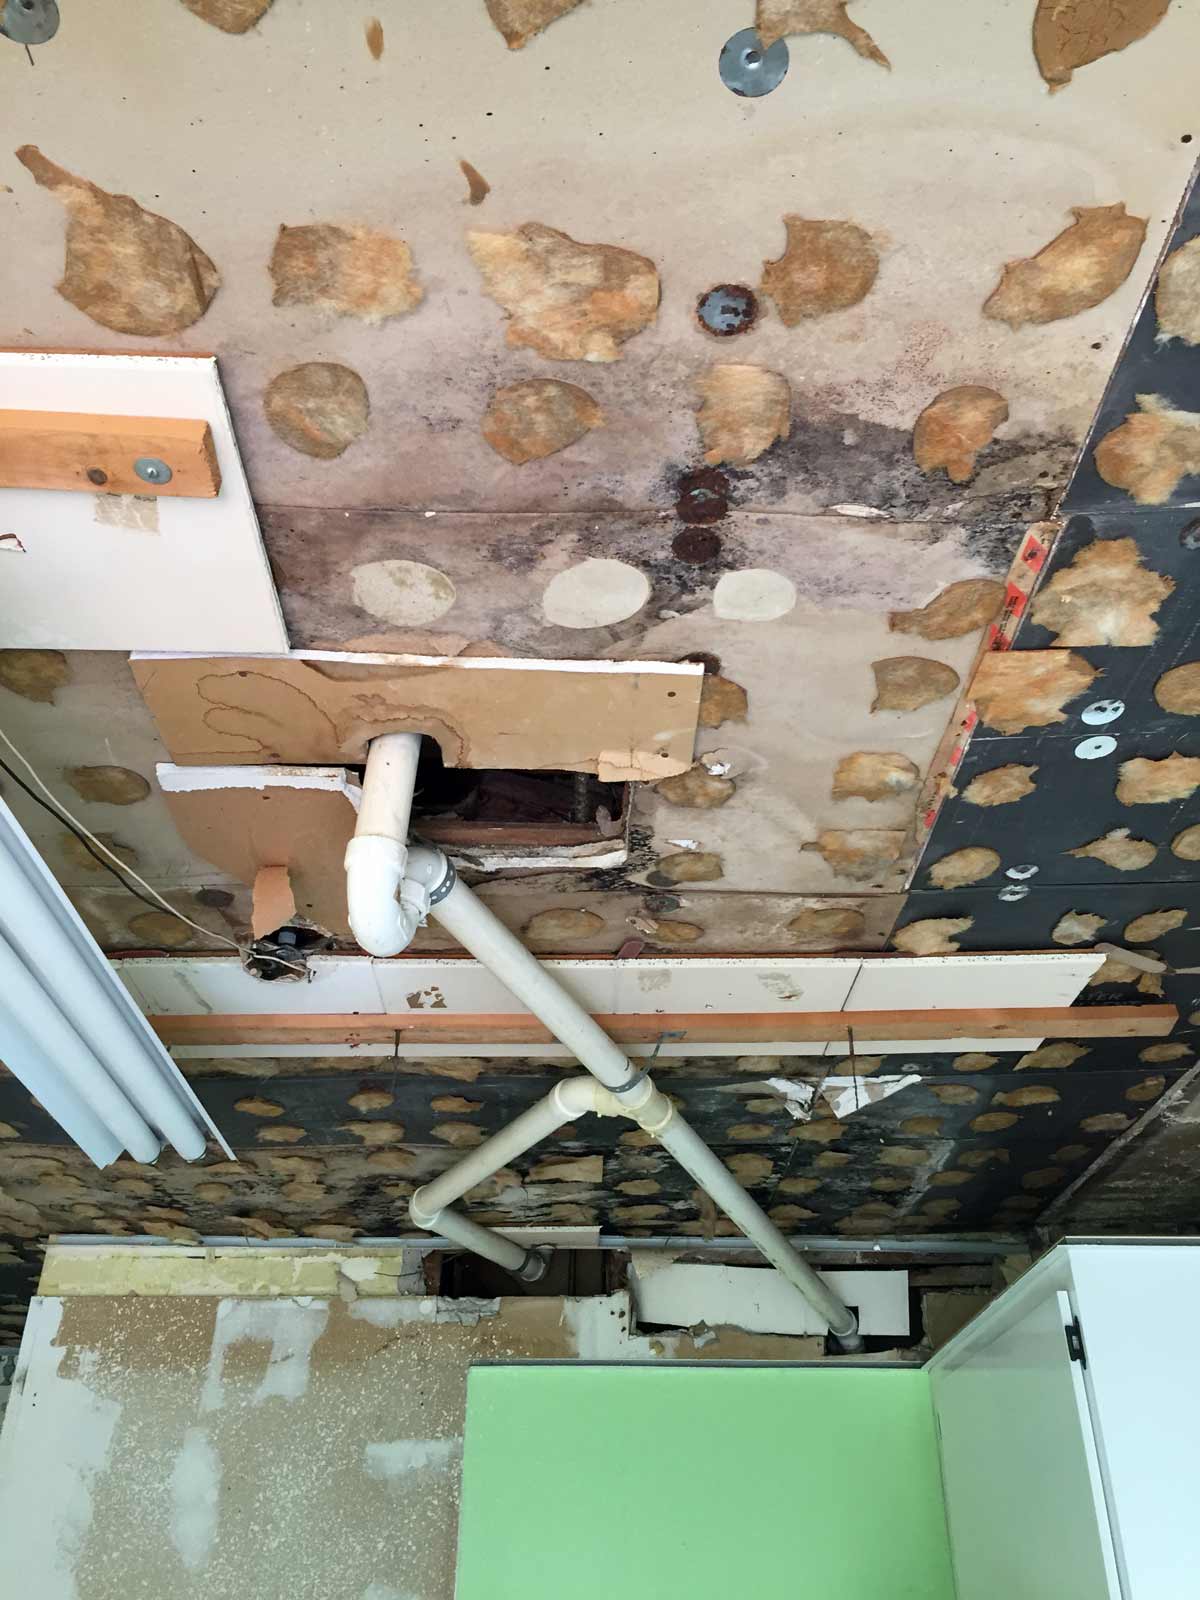 How to deal with unexpected plumbing under a drop ceiling